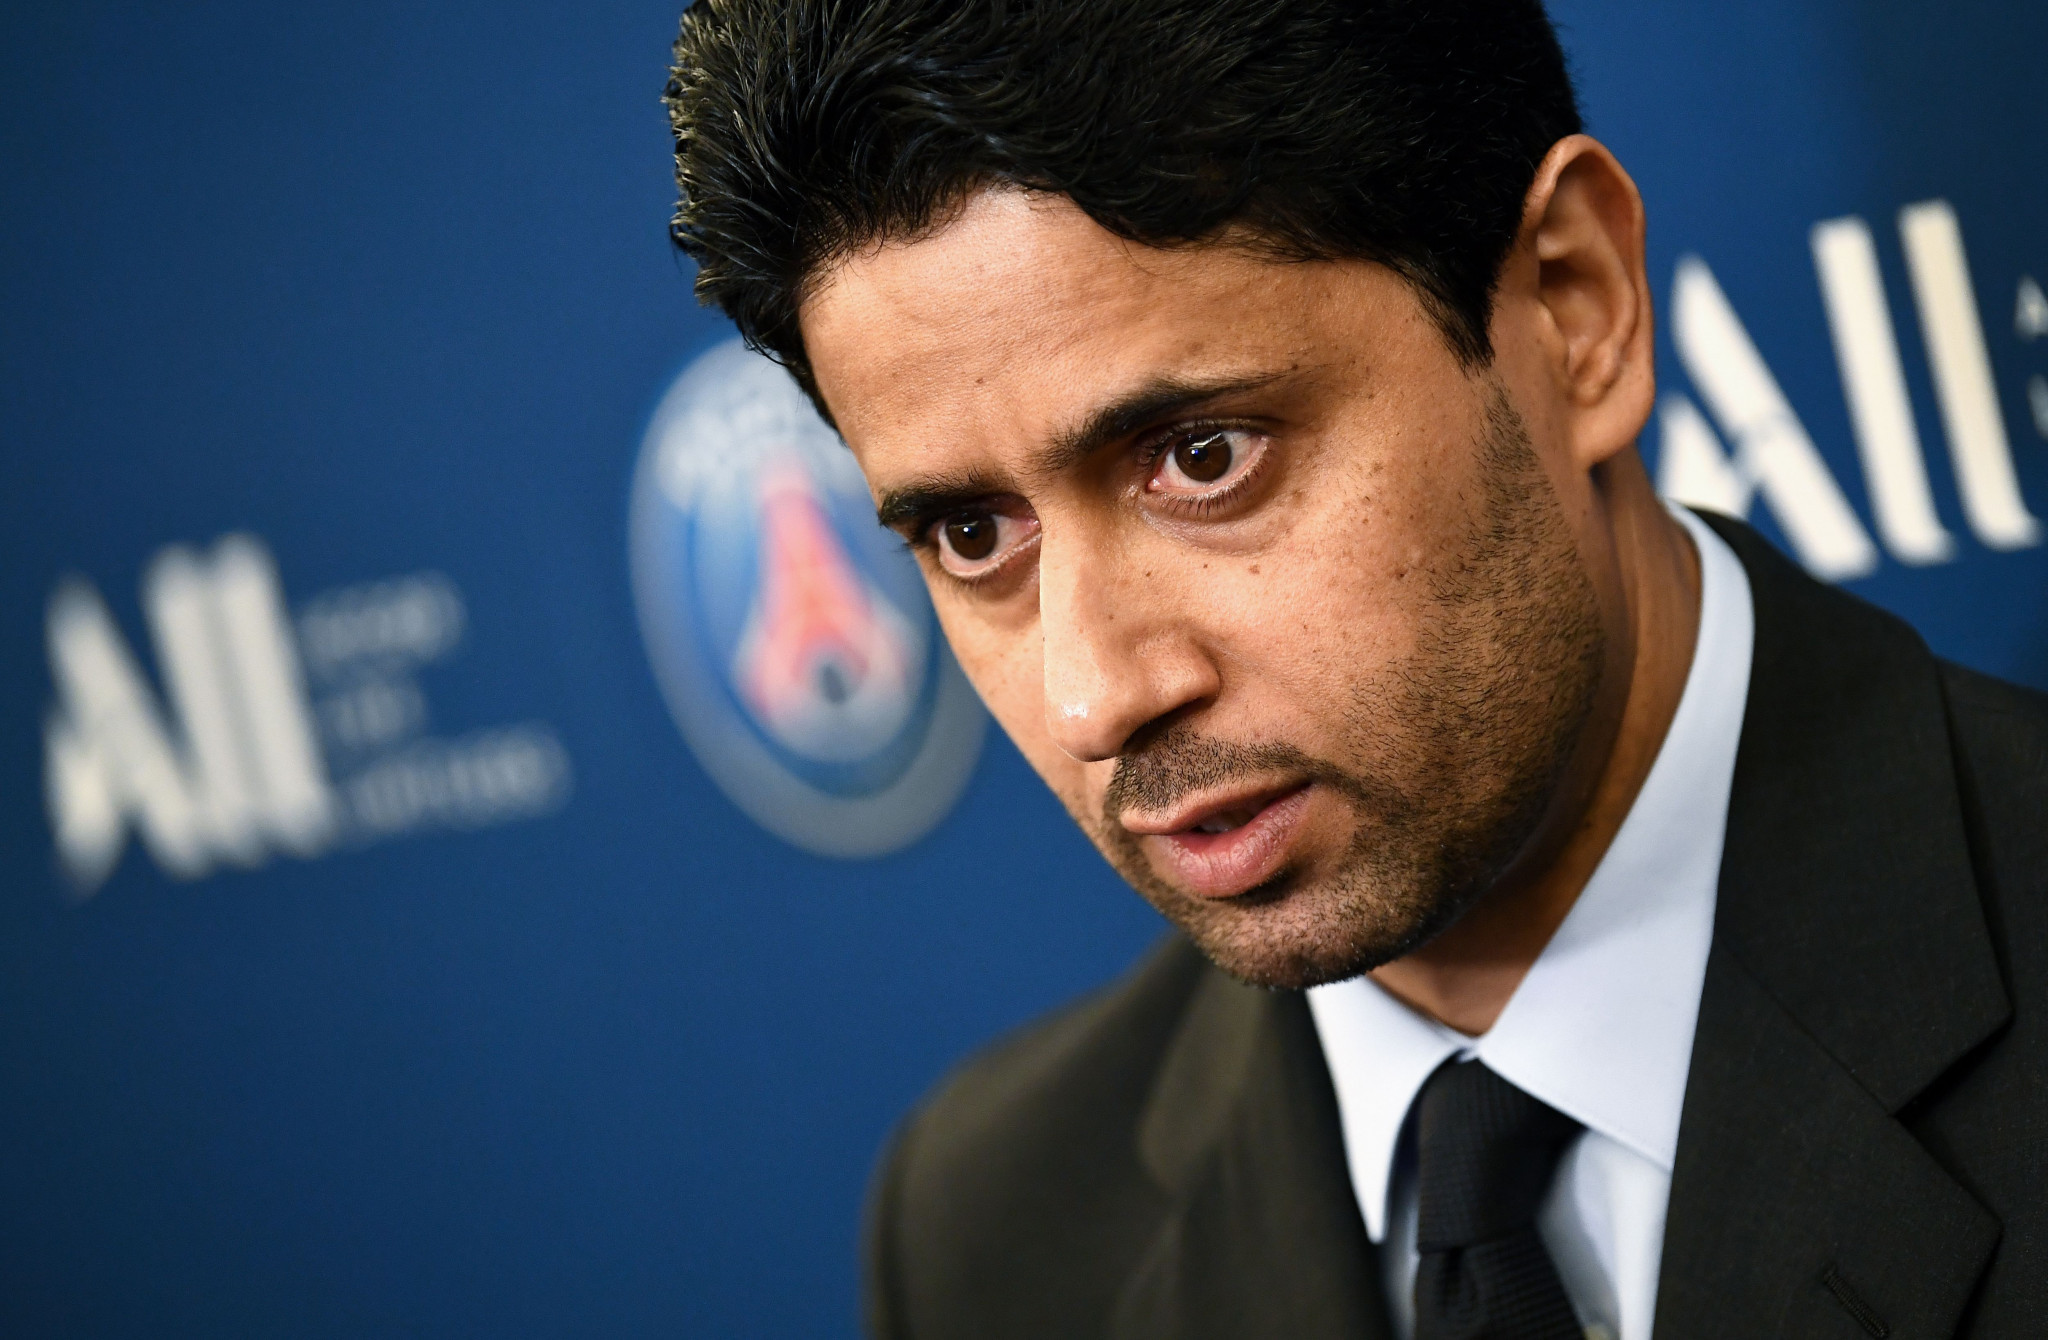 Paris Saint-Germain President Nasser Al-Khelaïfi, one of the most powerful men in sport, has been charged with corruption over the bidding process for the 2019 IAAF World Championships in Doha, according to judicial sources ©Getty Images